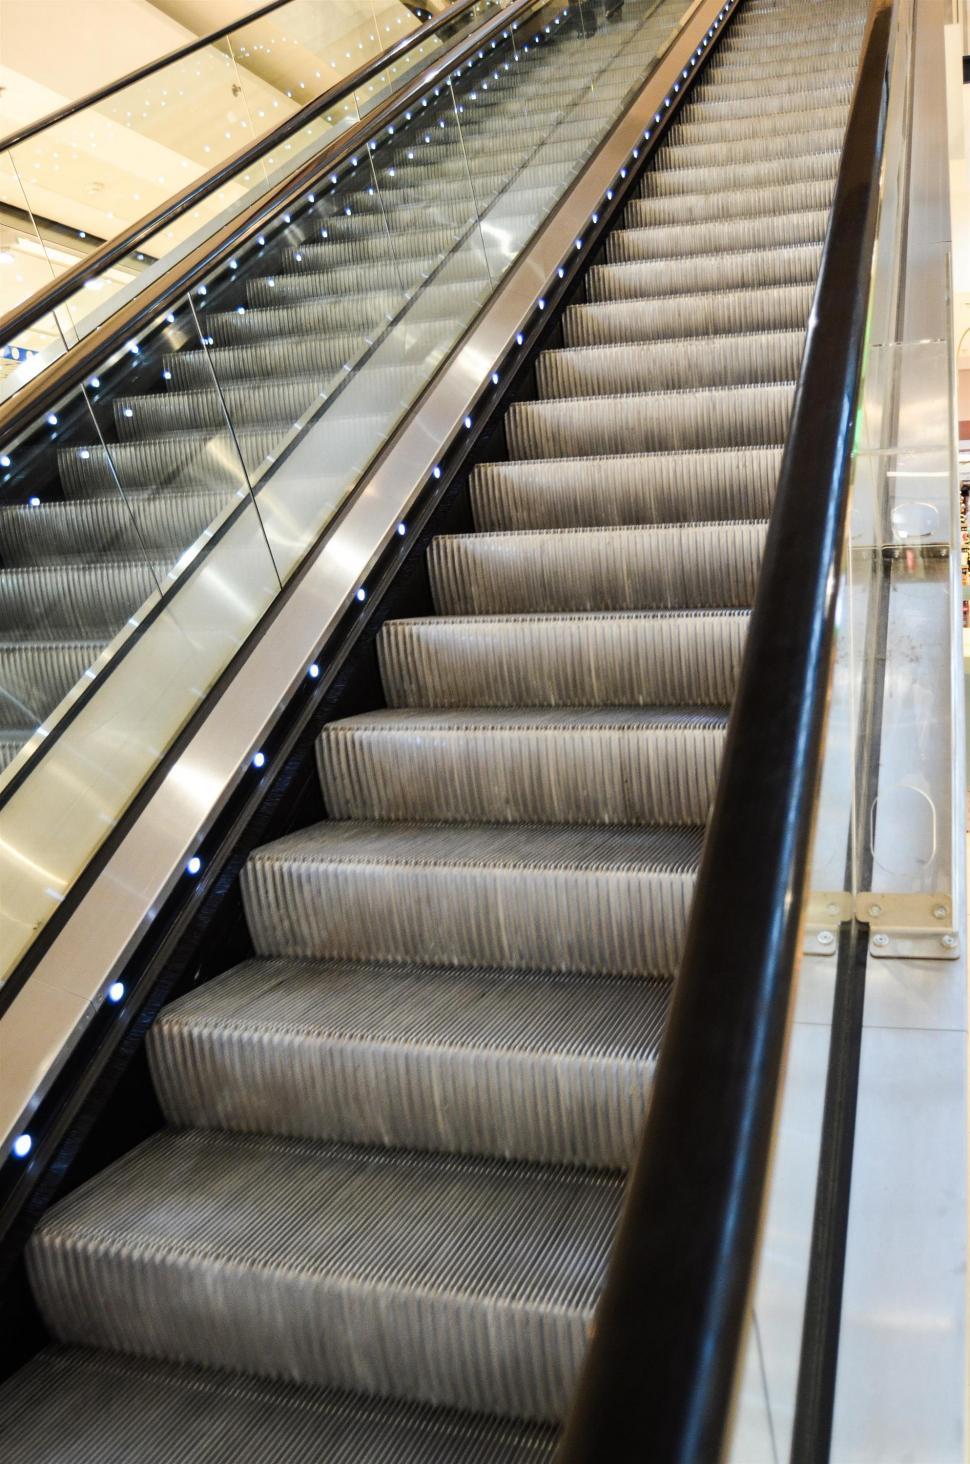 Free Image of Escalator With Stairs Leading Up 